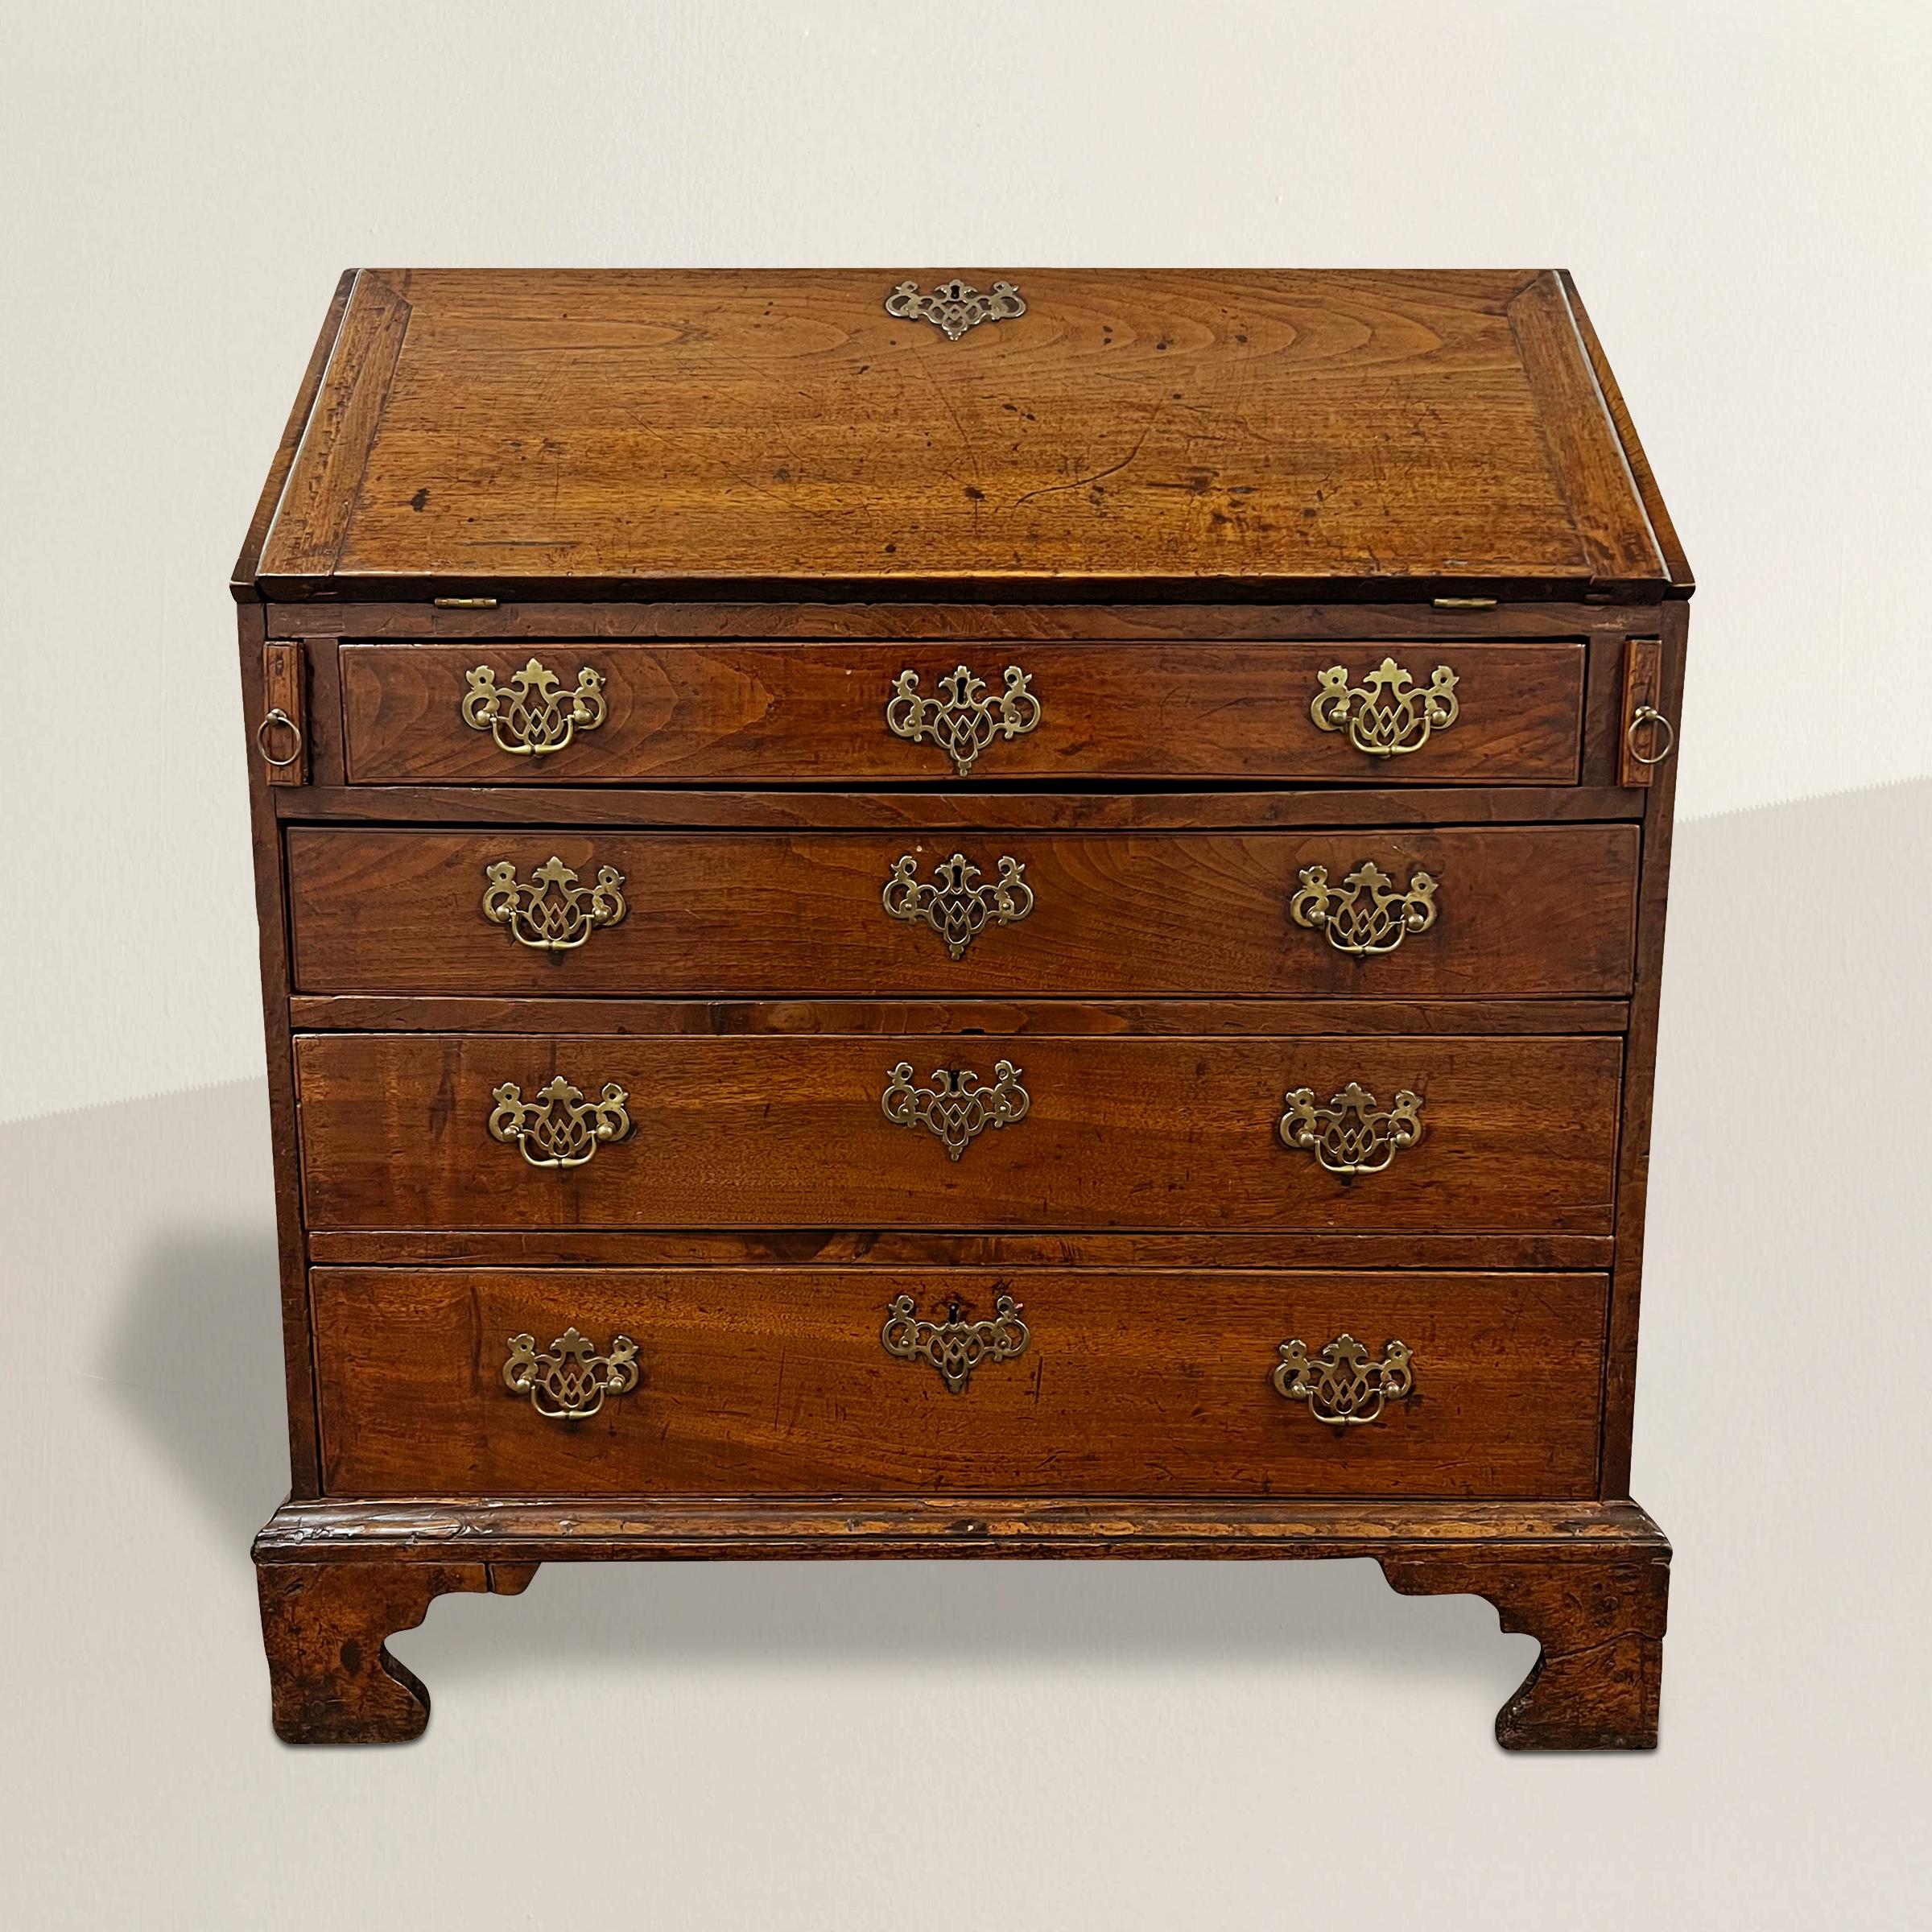 Step into the grace and sophistication of the 18th century with our exquisite English oak secretaire, an embodiment of Georgian Chippendale-style craftsmanship. Elegantly merging form and function, this slant-front beauty features four drawers